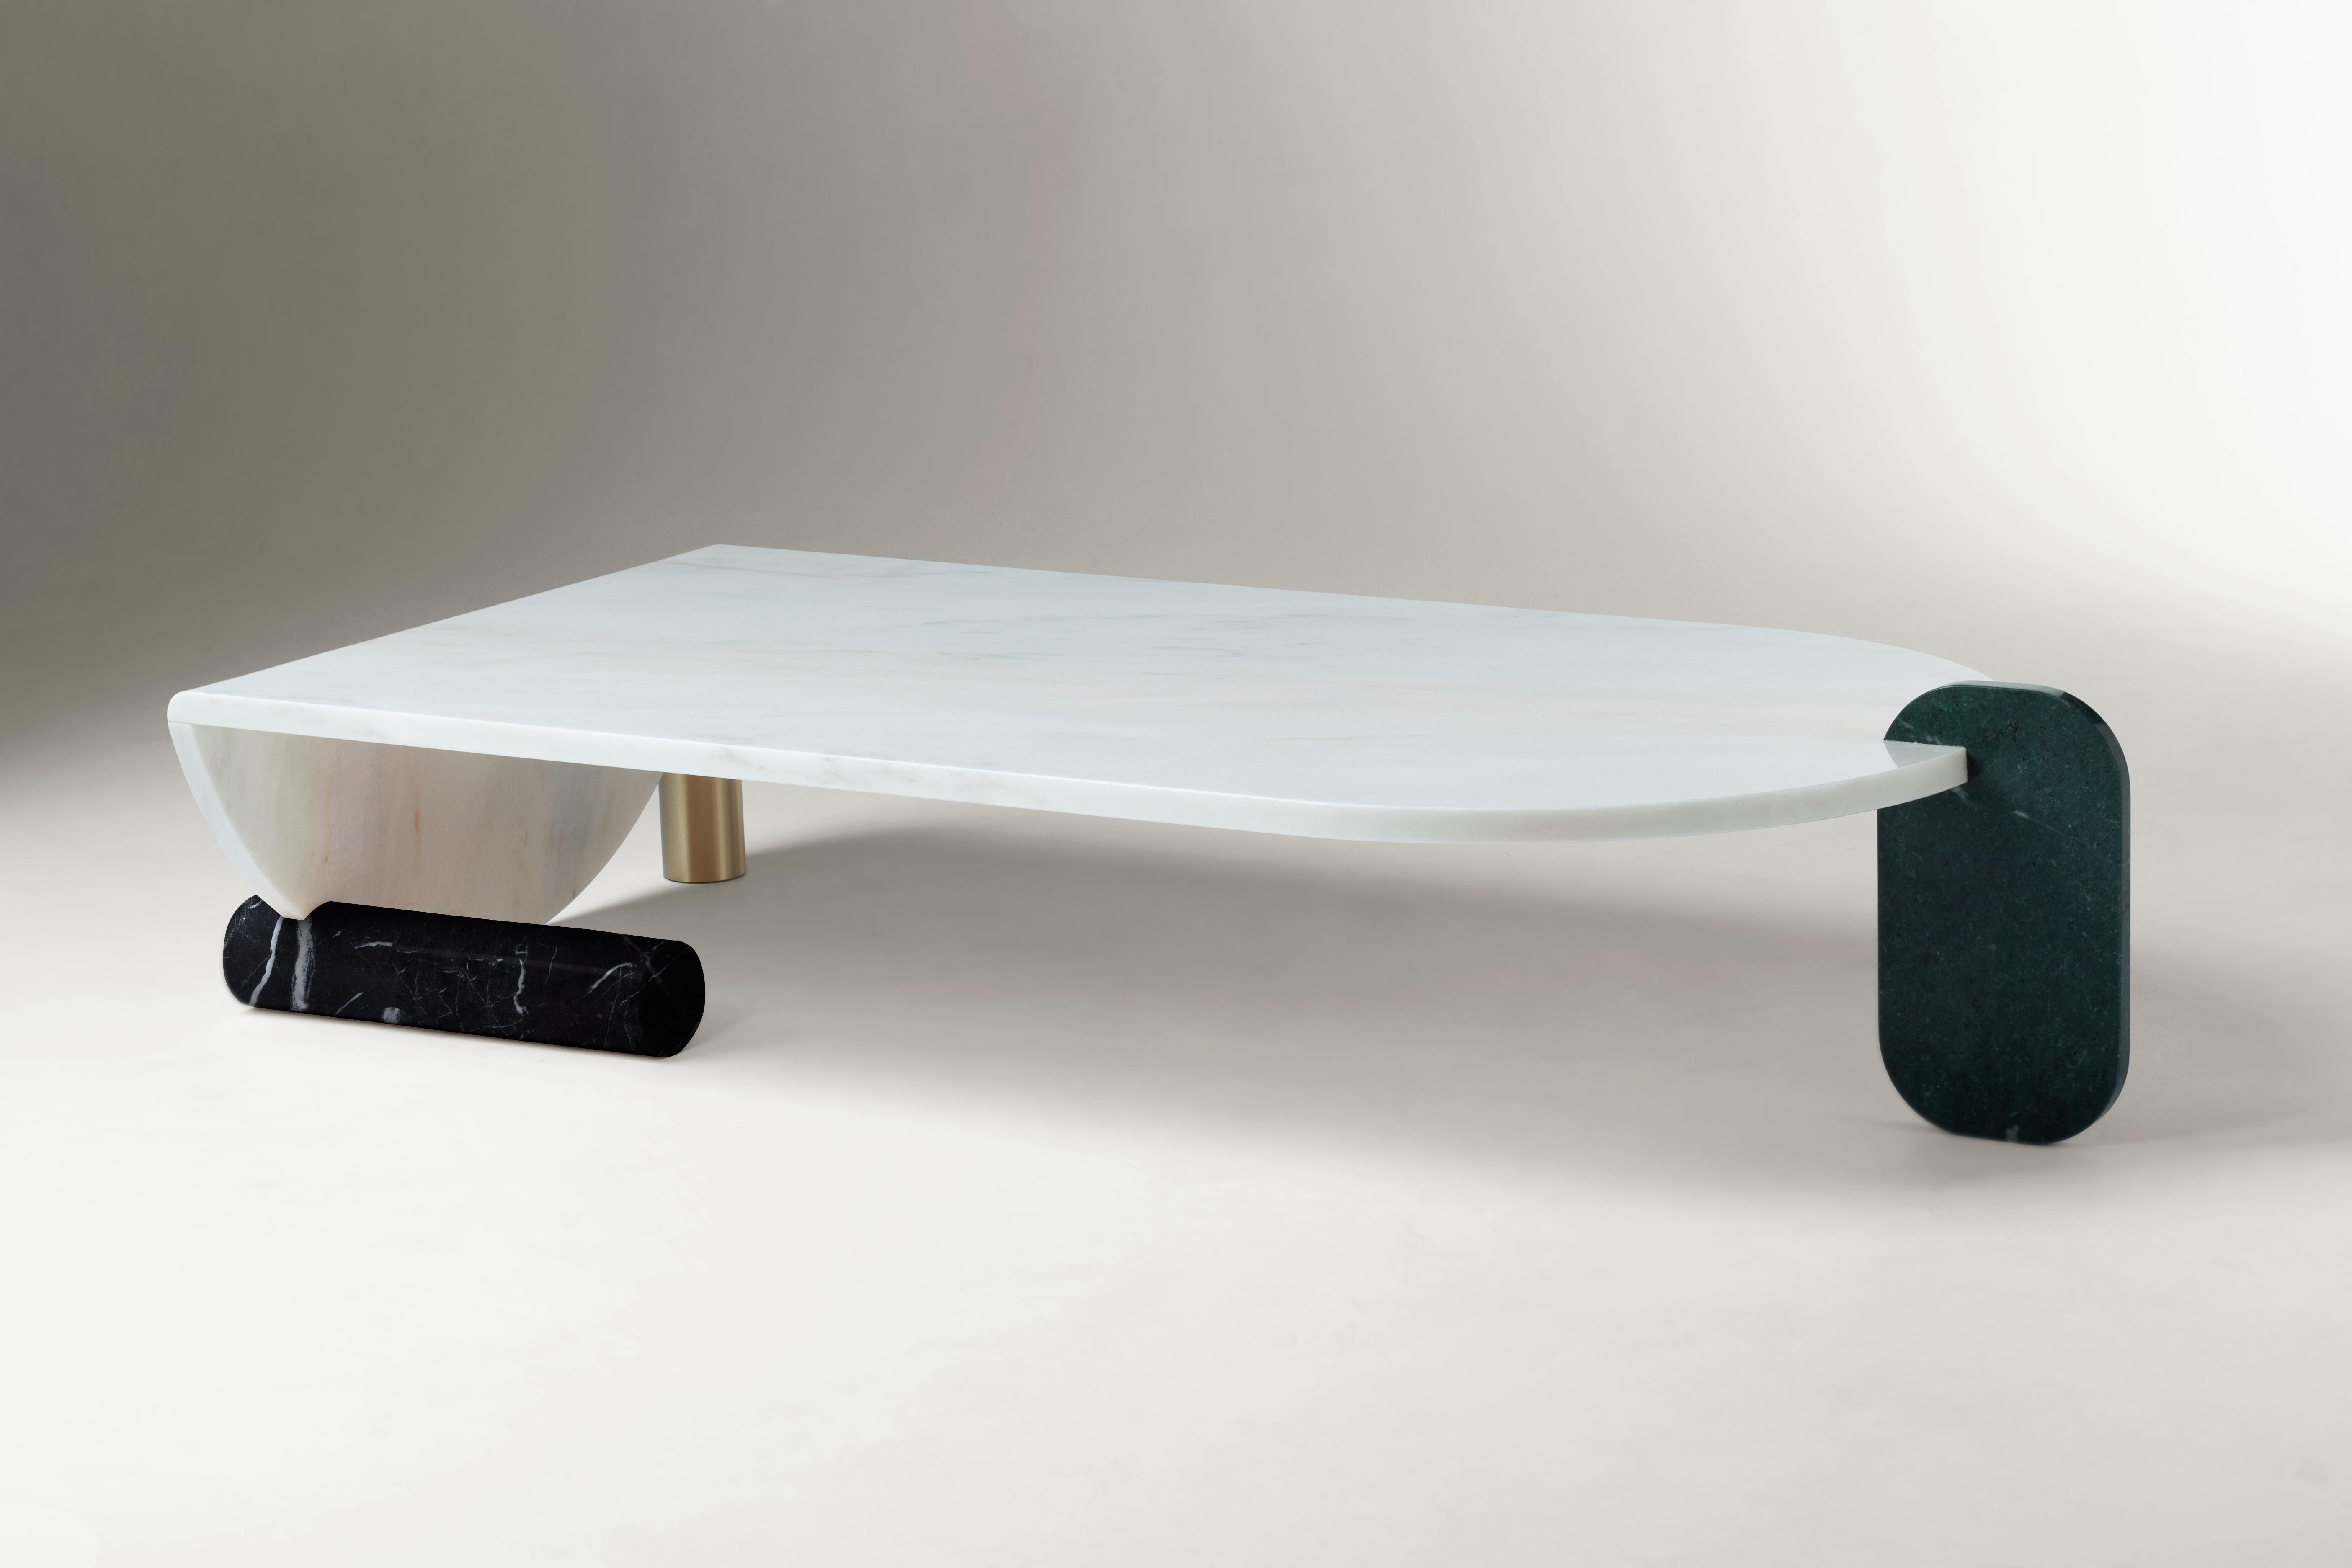 The geometrical shapes of these tables play between them in a game of proportion and color which results in the creation of a perfect balance and tension of material and negative space. The absence of figurative shapes allows this table to look